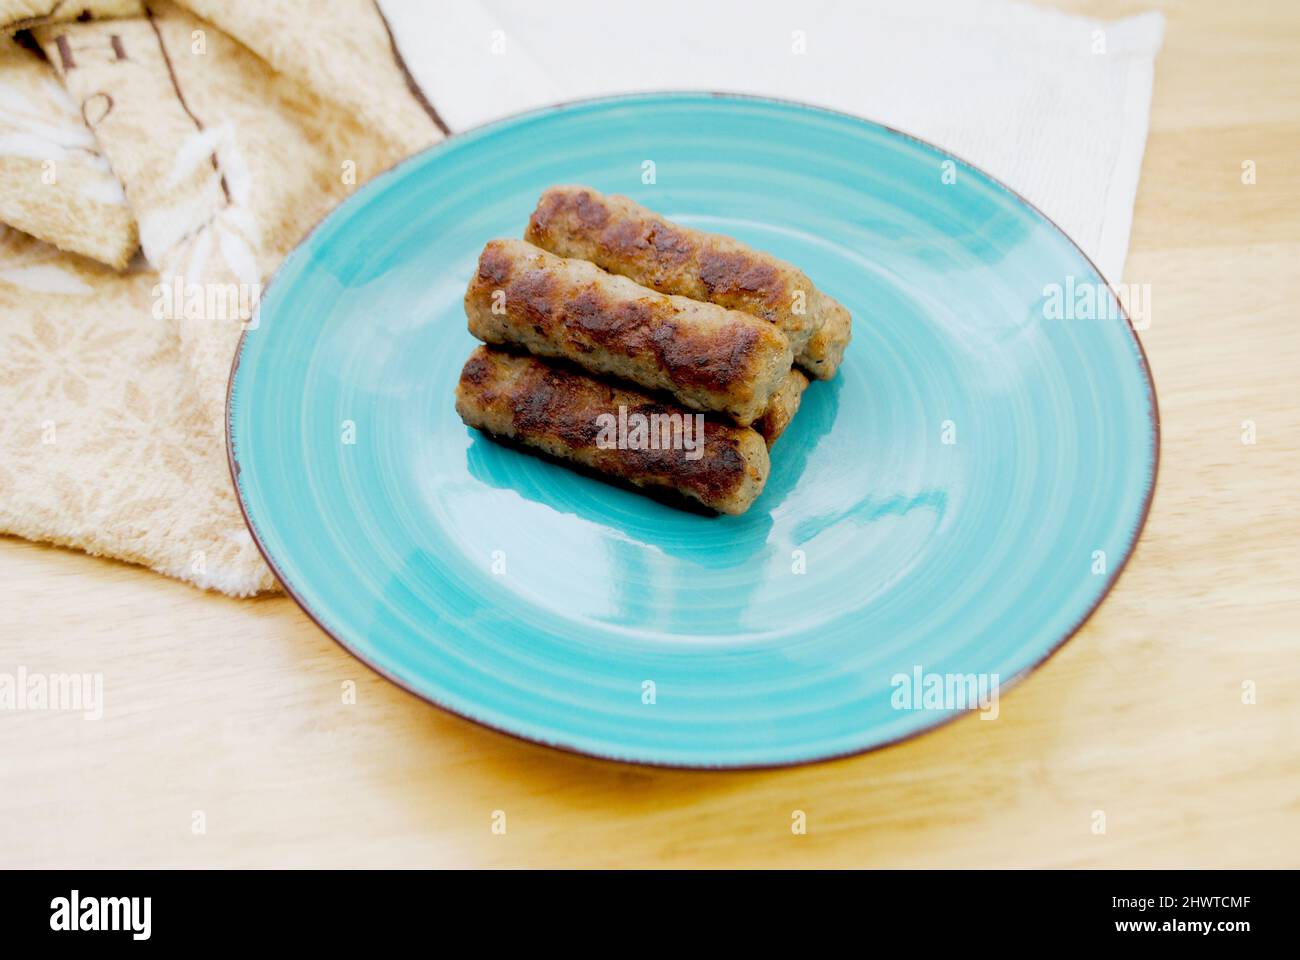 Cooked Breakfast Sausage Links Served on a Plate Stock Photo